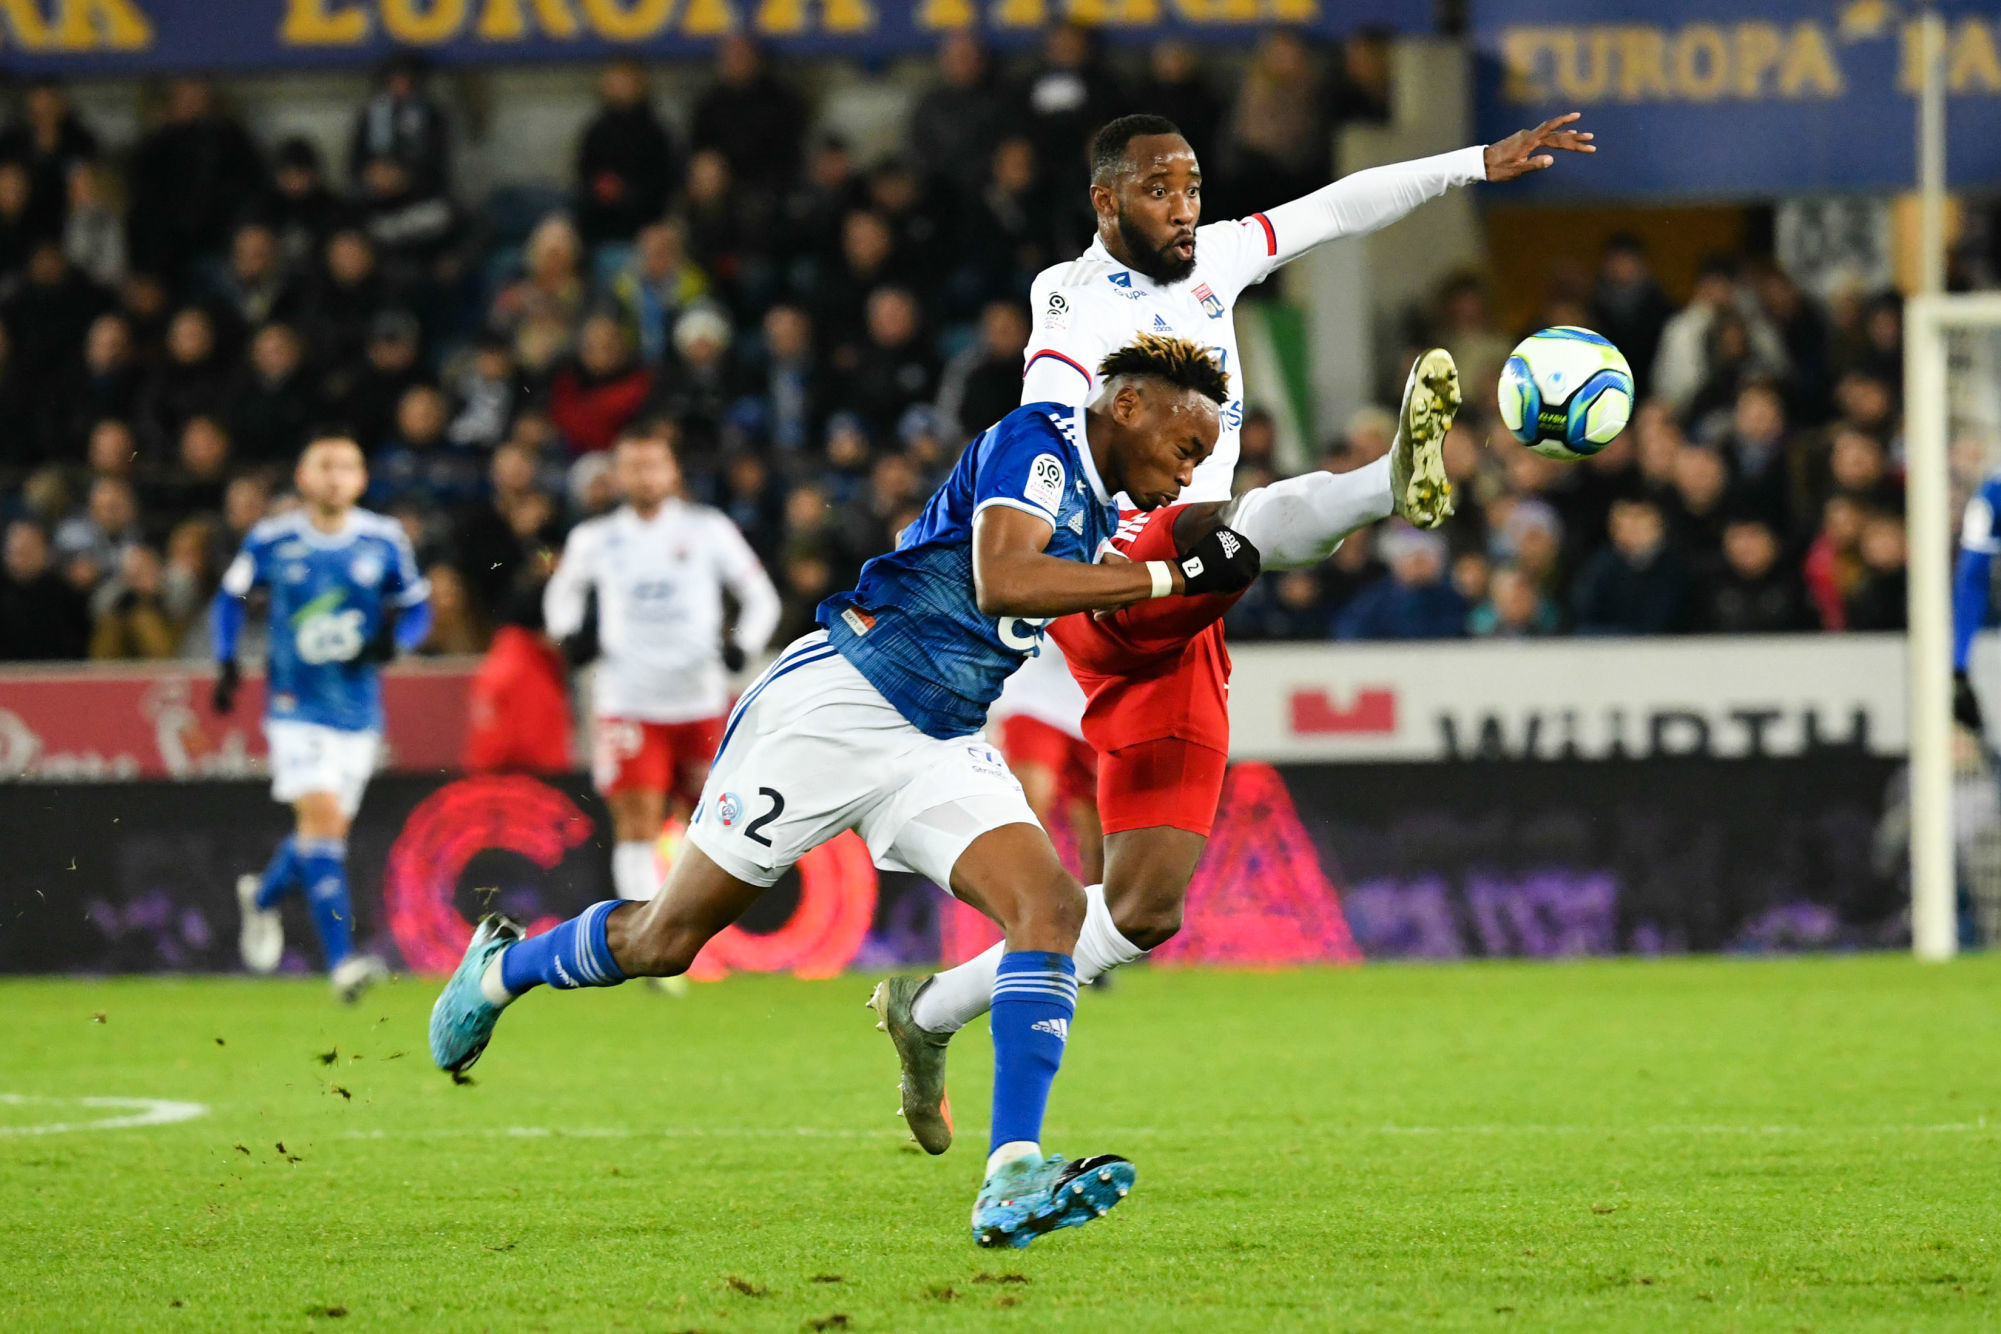 Mohamed SIMAKAN of Strasbourg and Moussa DEMBELE of Lyon during the Ligue 1 match between Strasbourg and Lyon at Stade de la Meinau on November 30, 2019 in Strasbourg, France. (Photo by Sebastien Bozon/Icon Sport) - Stade de la Meinau - Strasbourg (France)